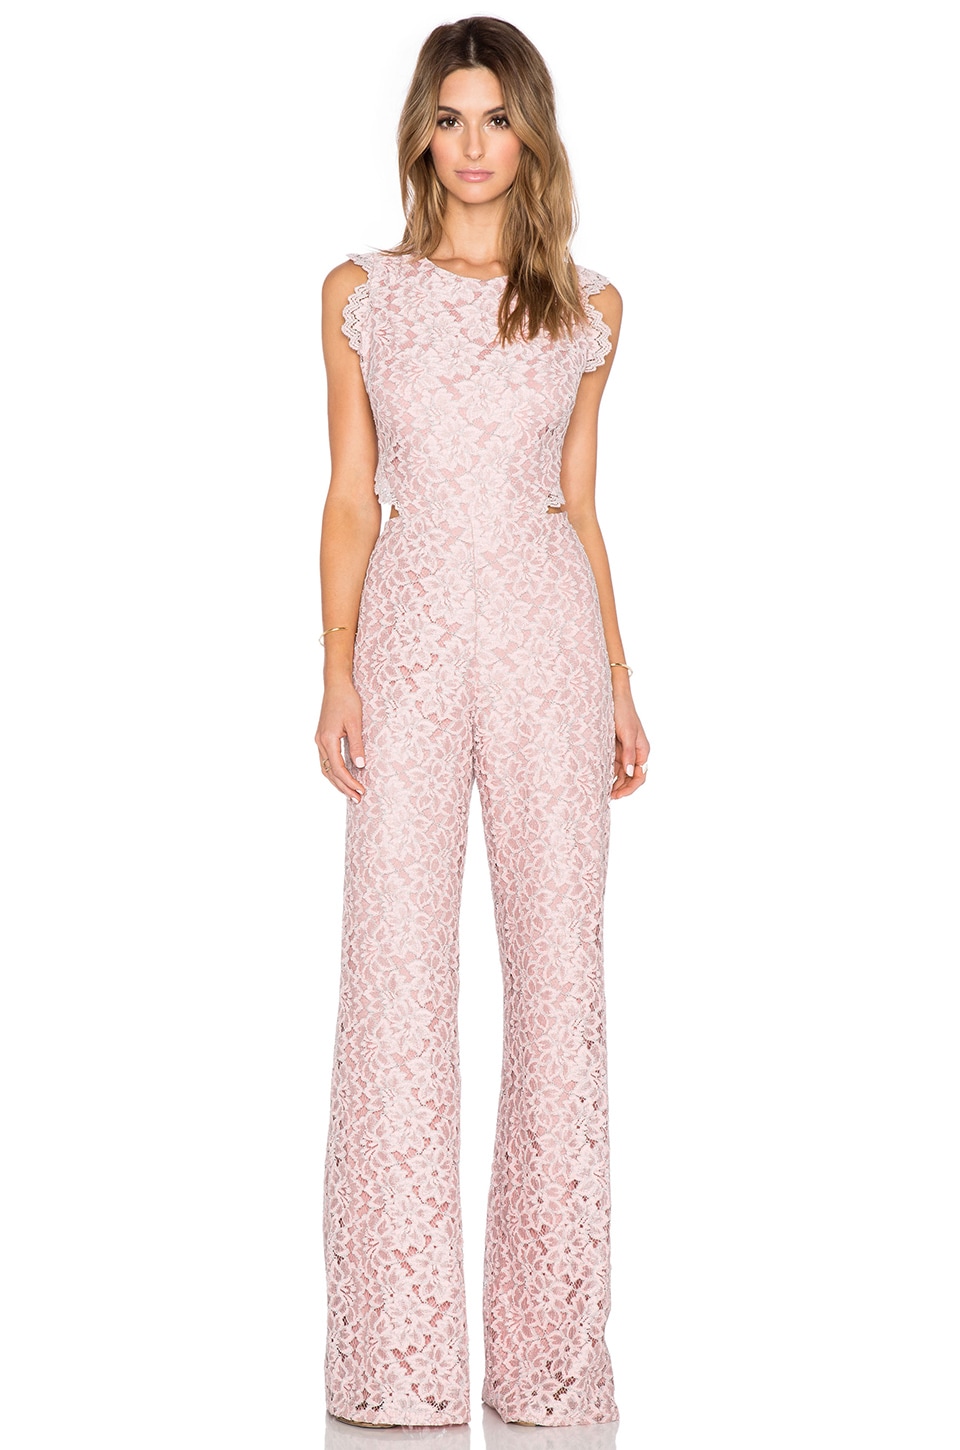 Alexis Livia Lace Jumpsuit in Pink Lace | REVOLVE